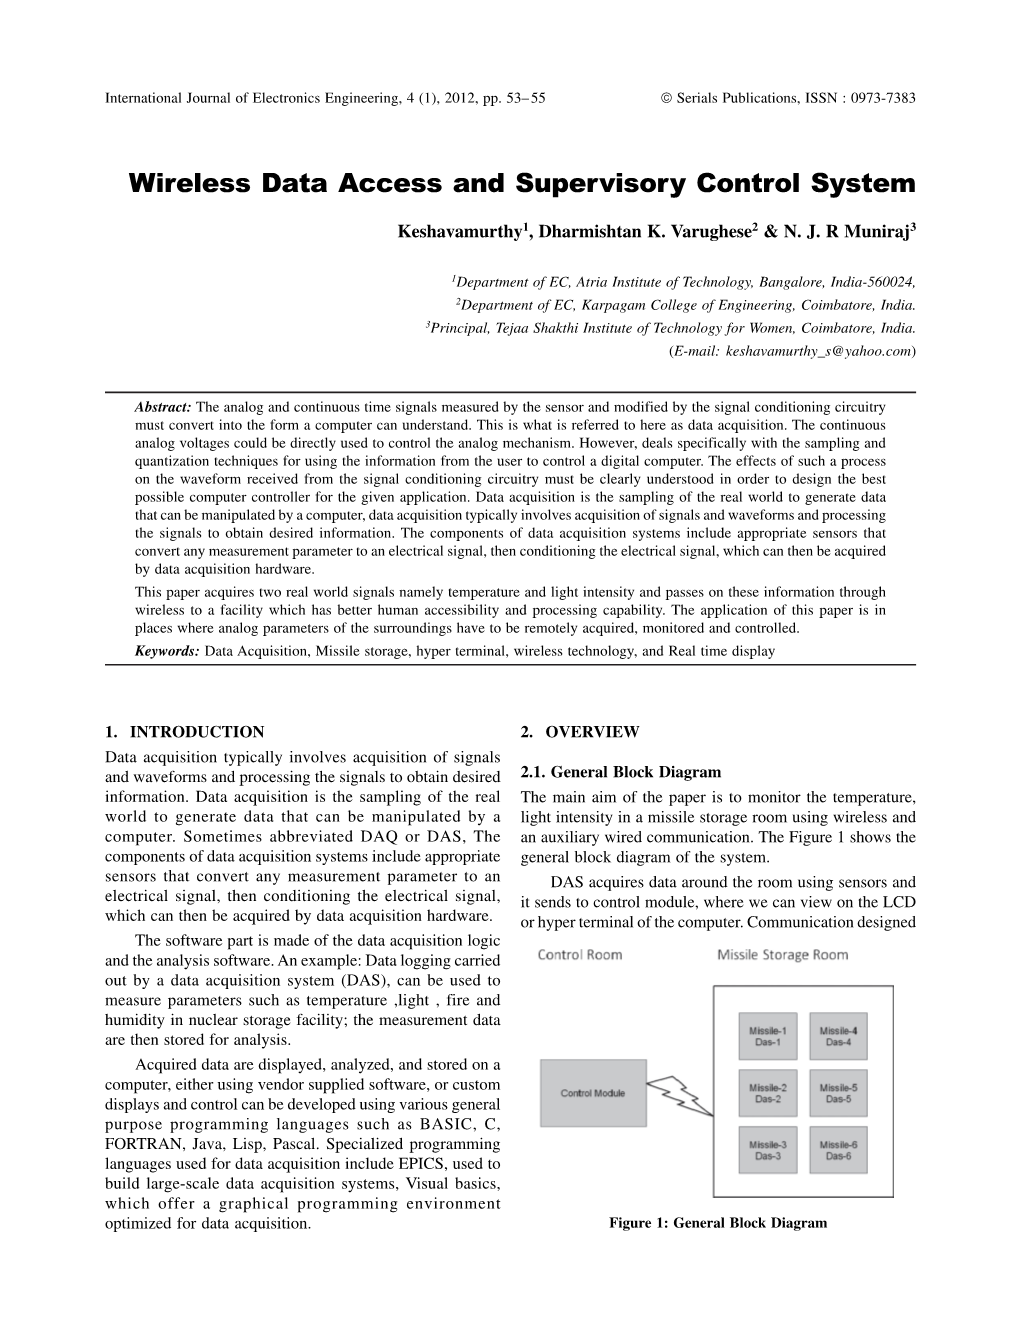 Wireless Data Access and Supervisory Control System